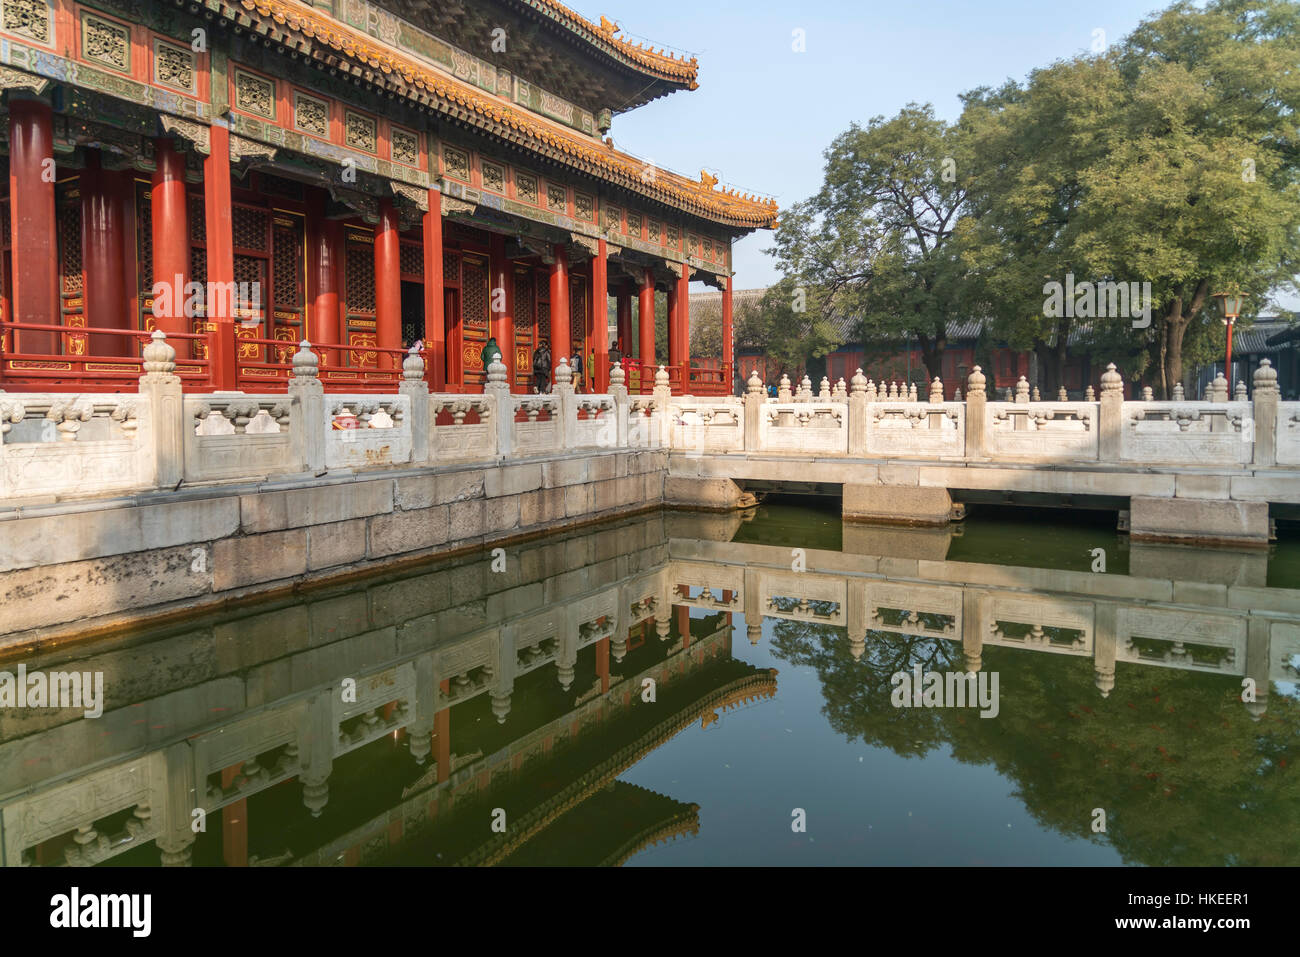 Temple of Confucius in Beijing, People's Republic of China, Asia Stock Photo